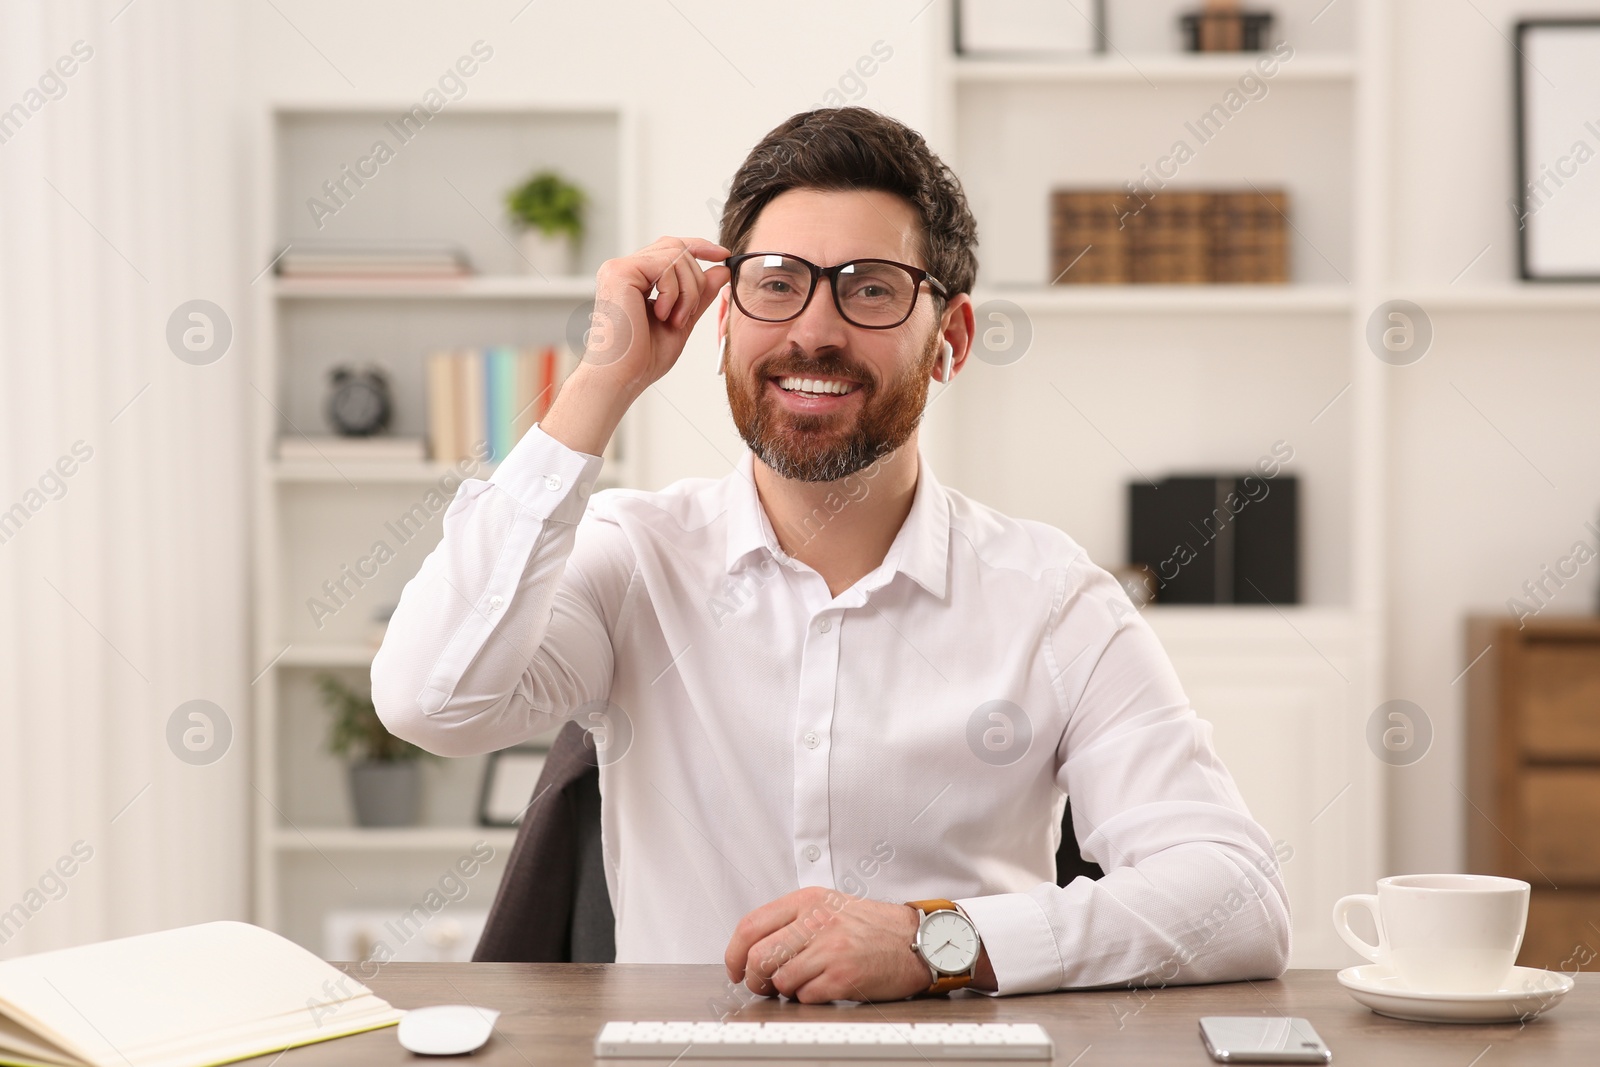 Photo of Happy businessman having online video call at wooden desk indoors, view from web camera